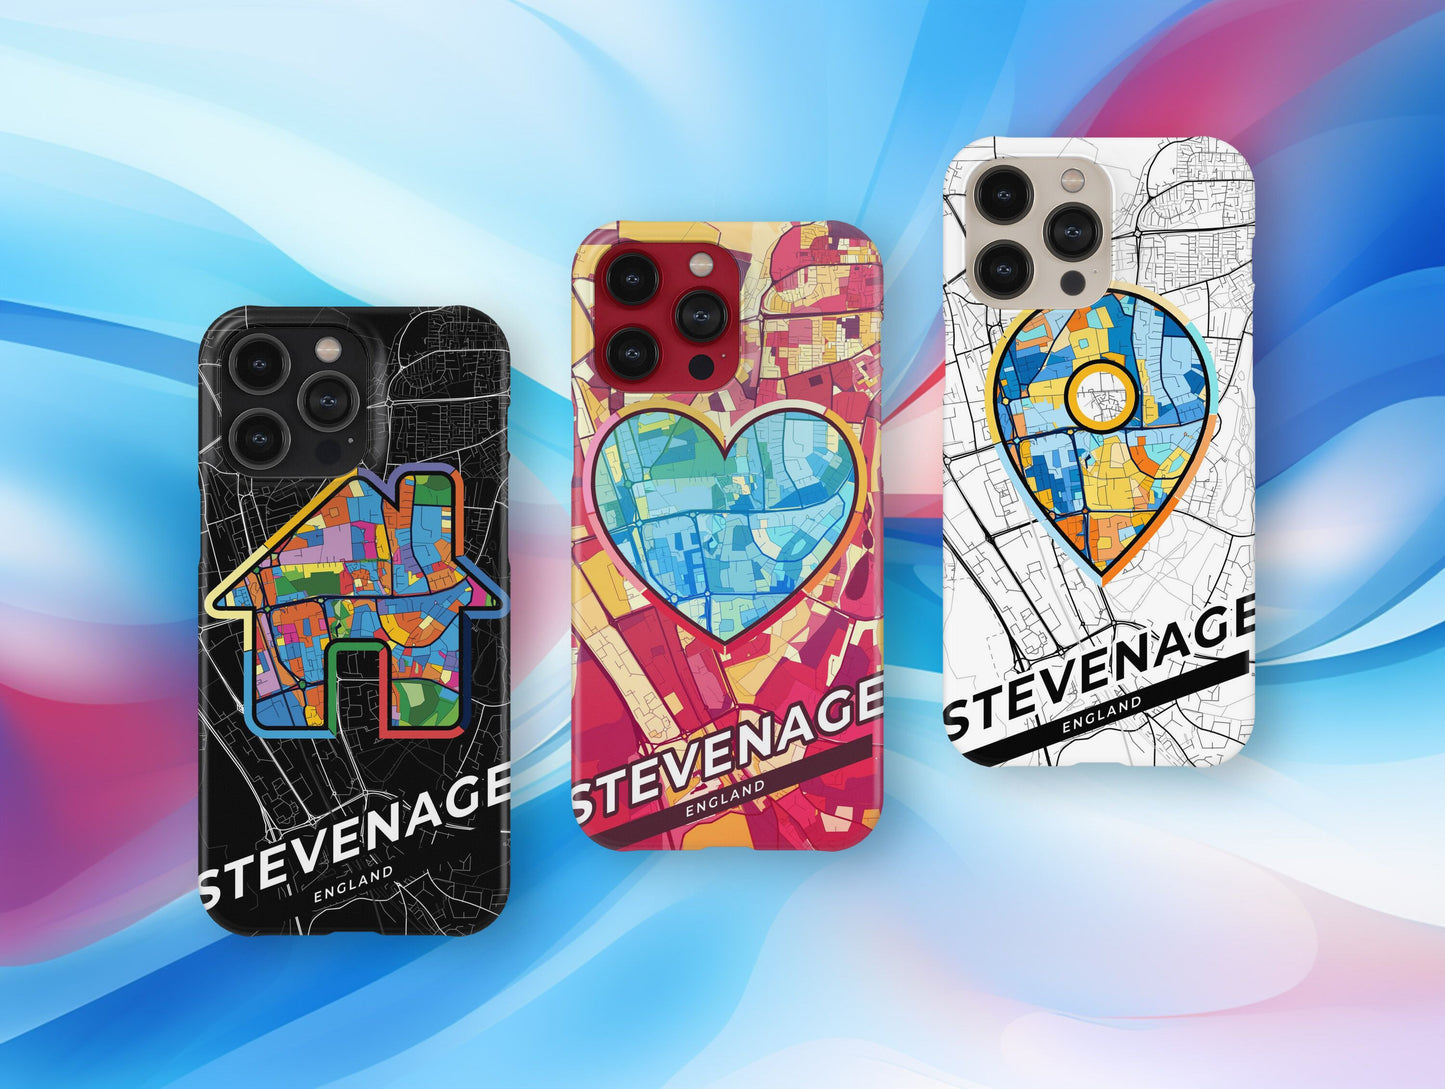 Stevenage England slim phone case with colorful icon